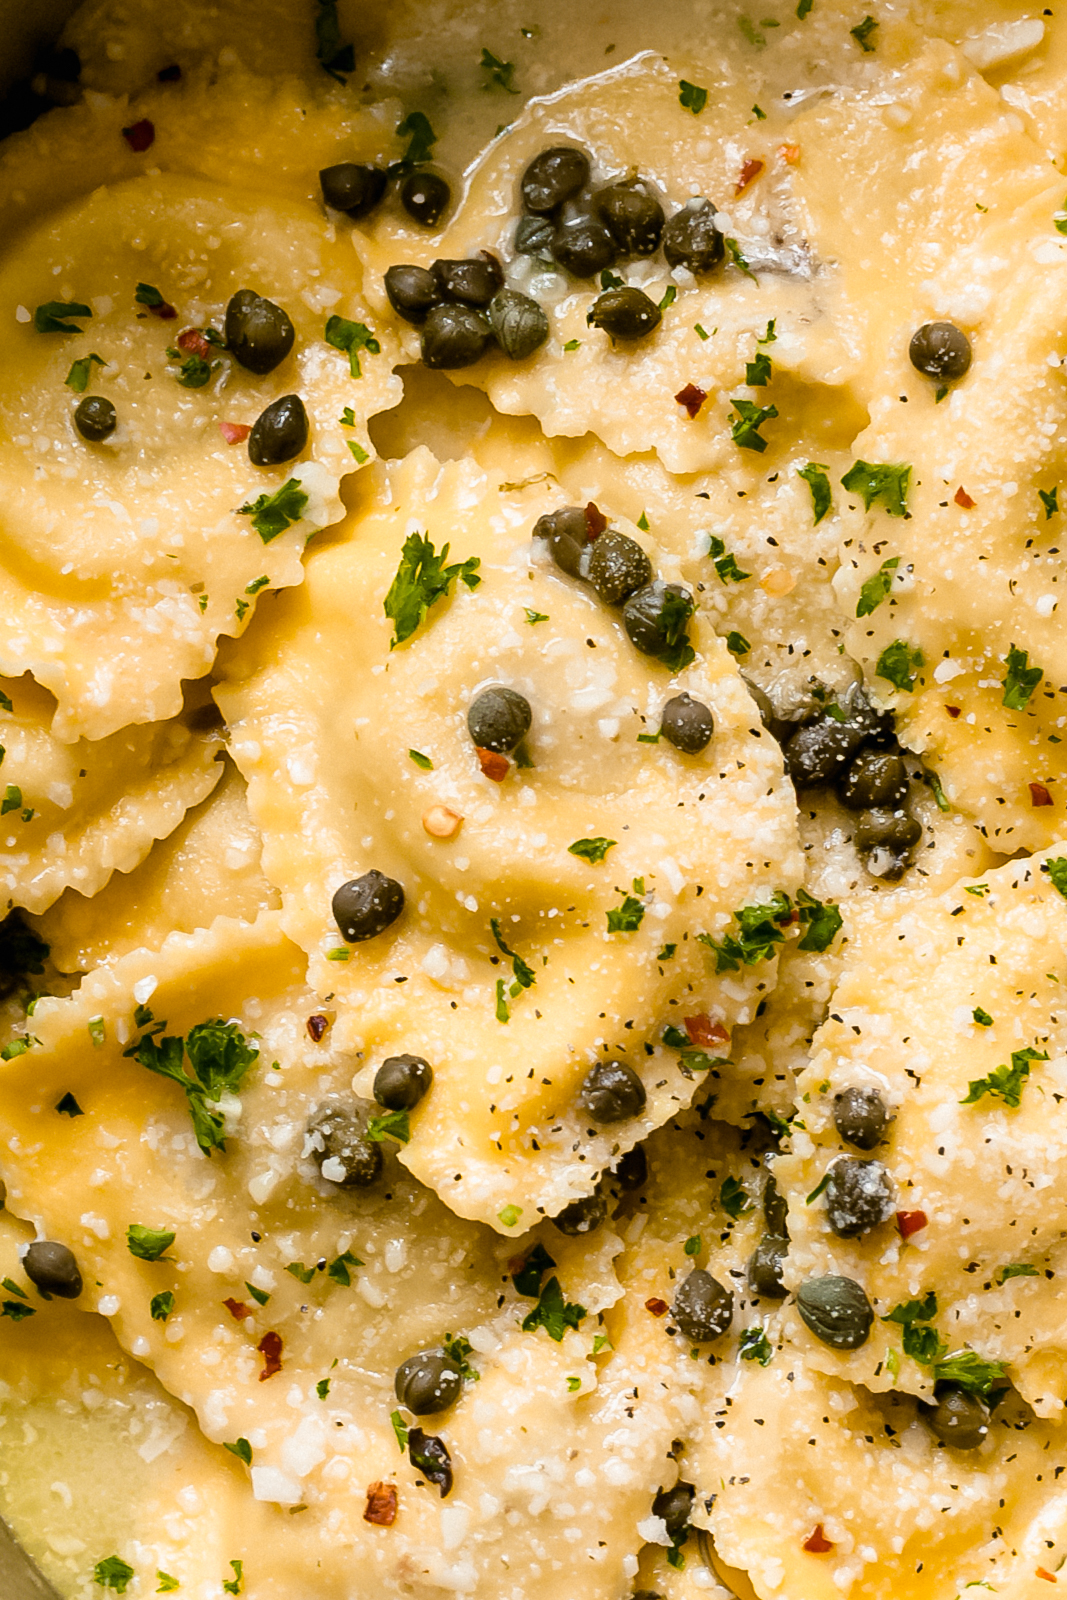 close up shot showing texture of ravioli in lemon butter sauce sprinkled with capers and parmesan cheese